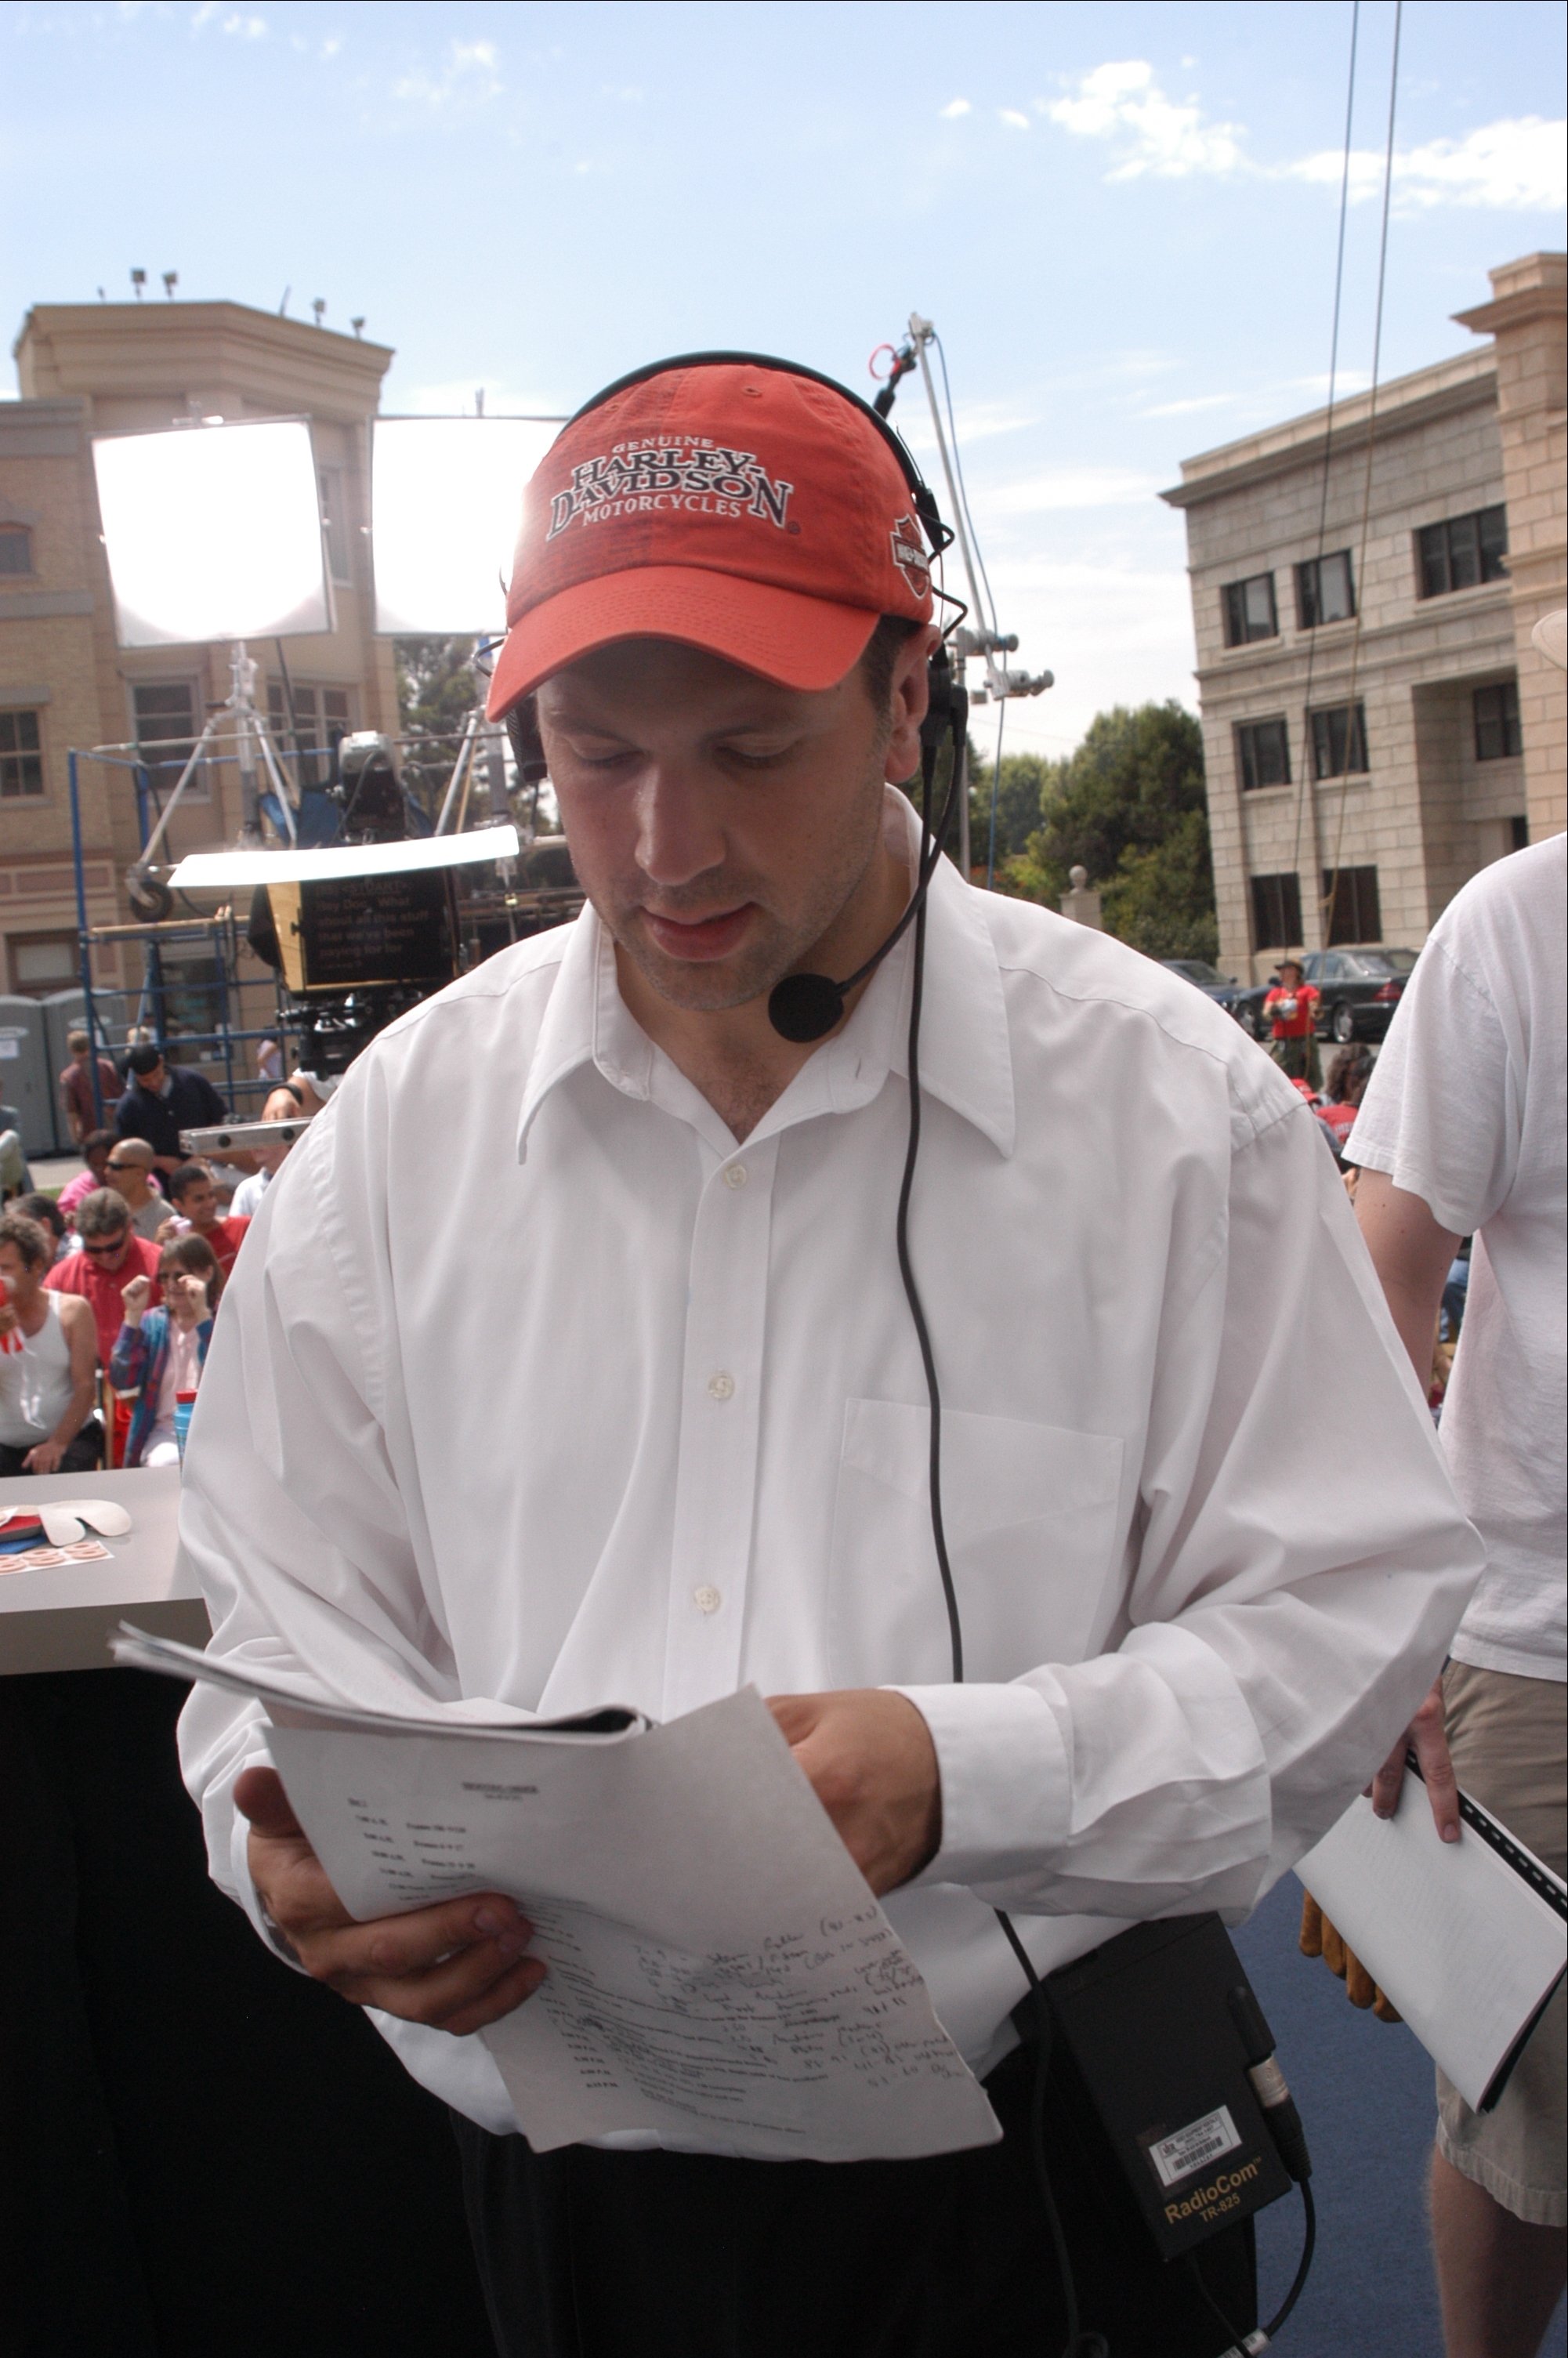 Paul Greenberg, Directing on the set of Walkfit.